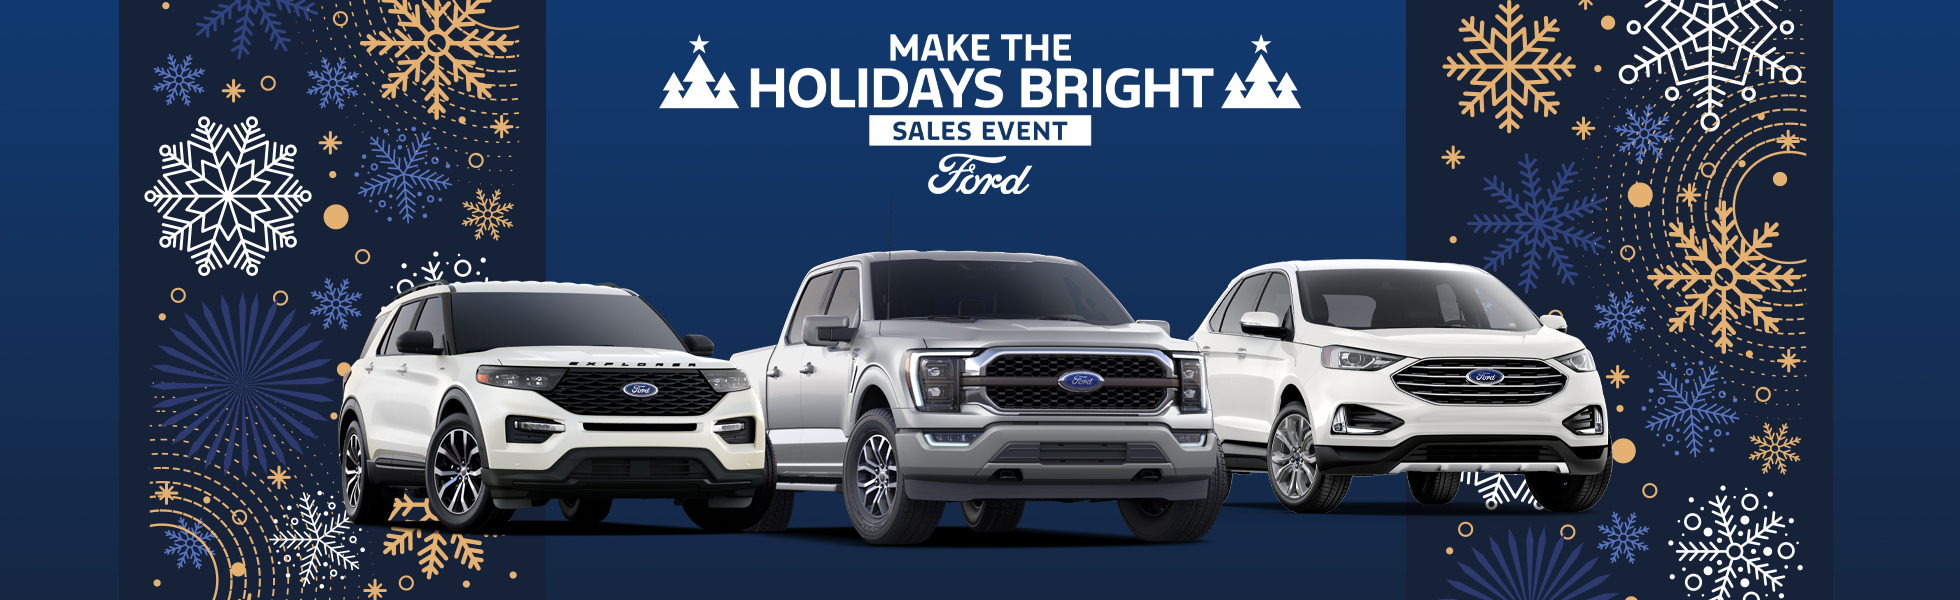 Make the Holidays Bright Ford Sales Event